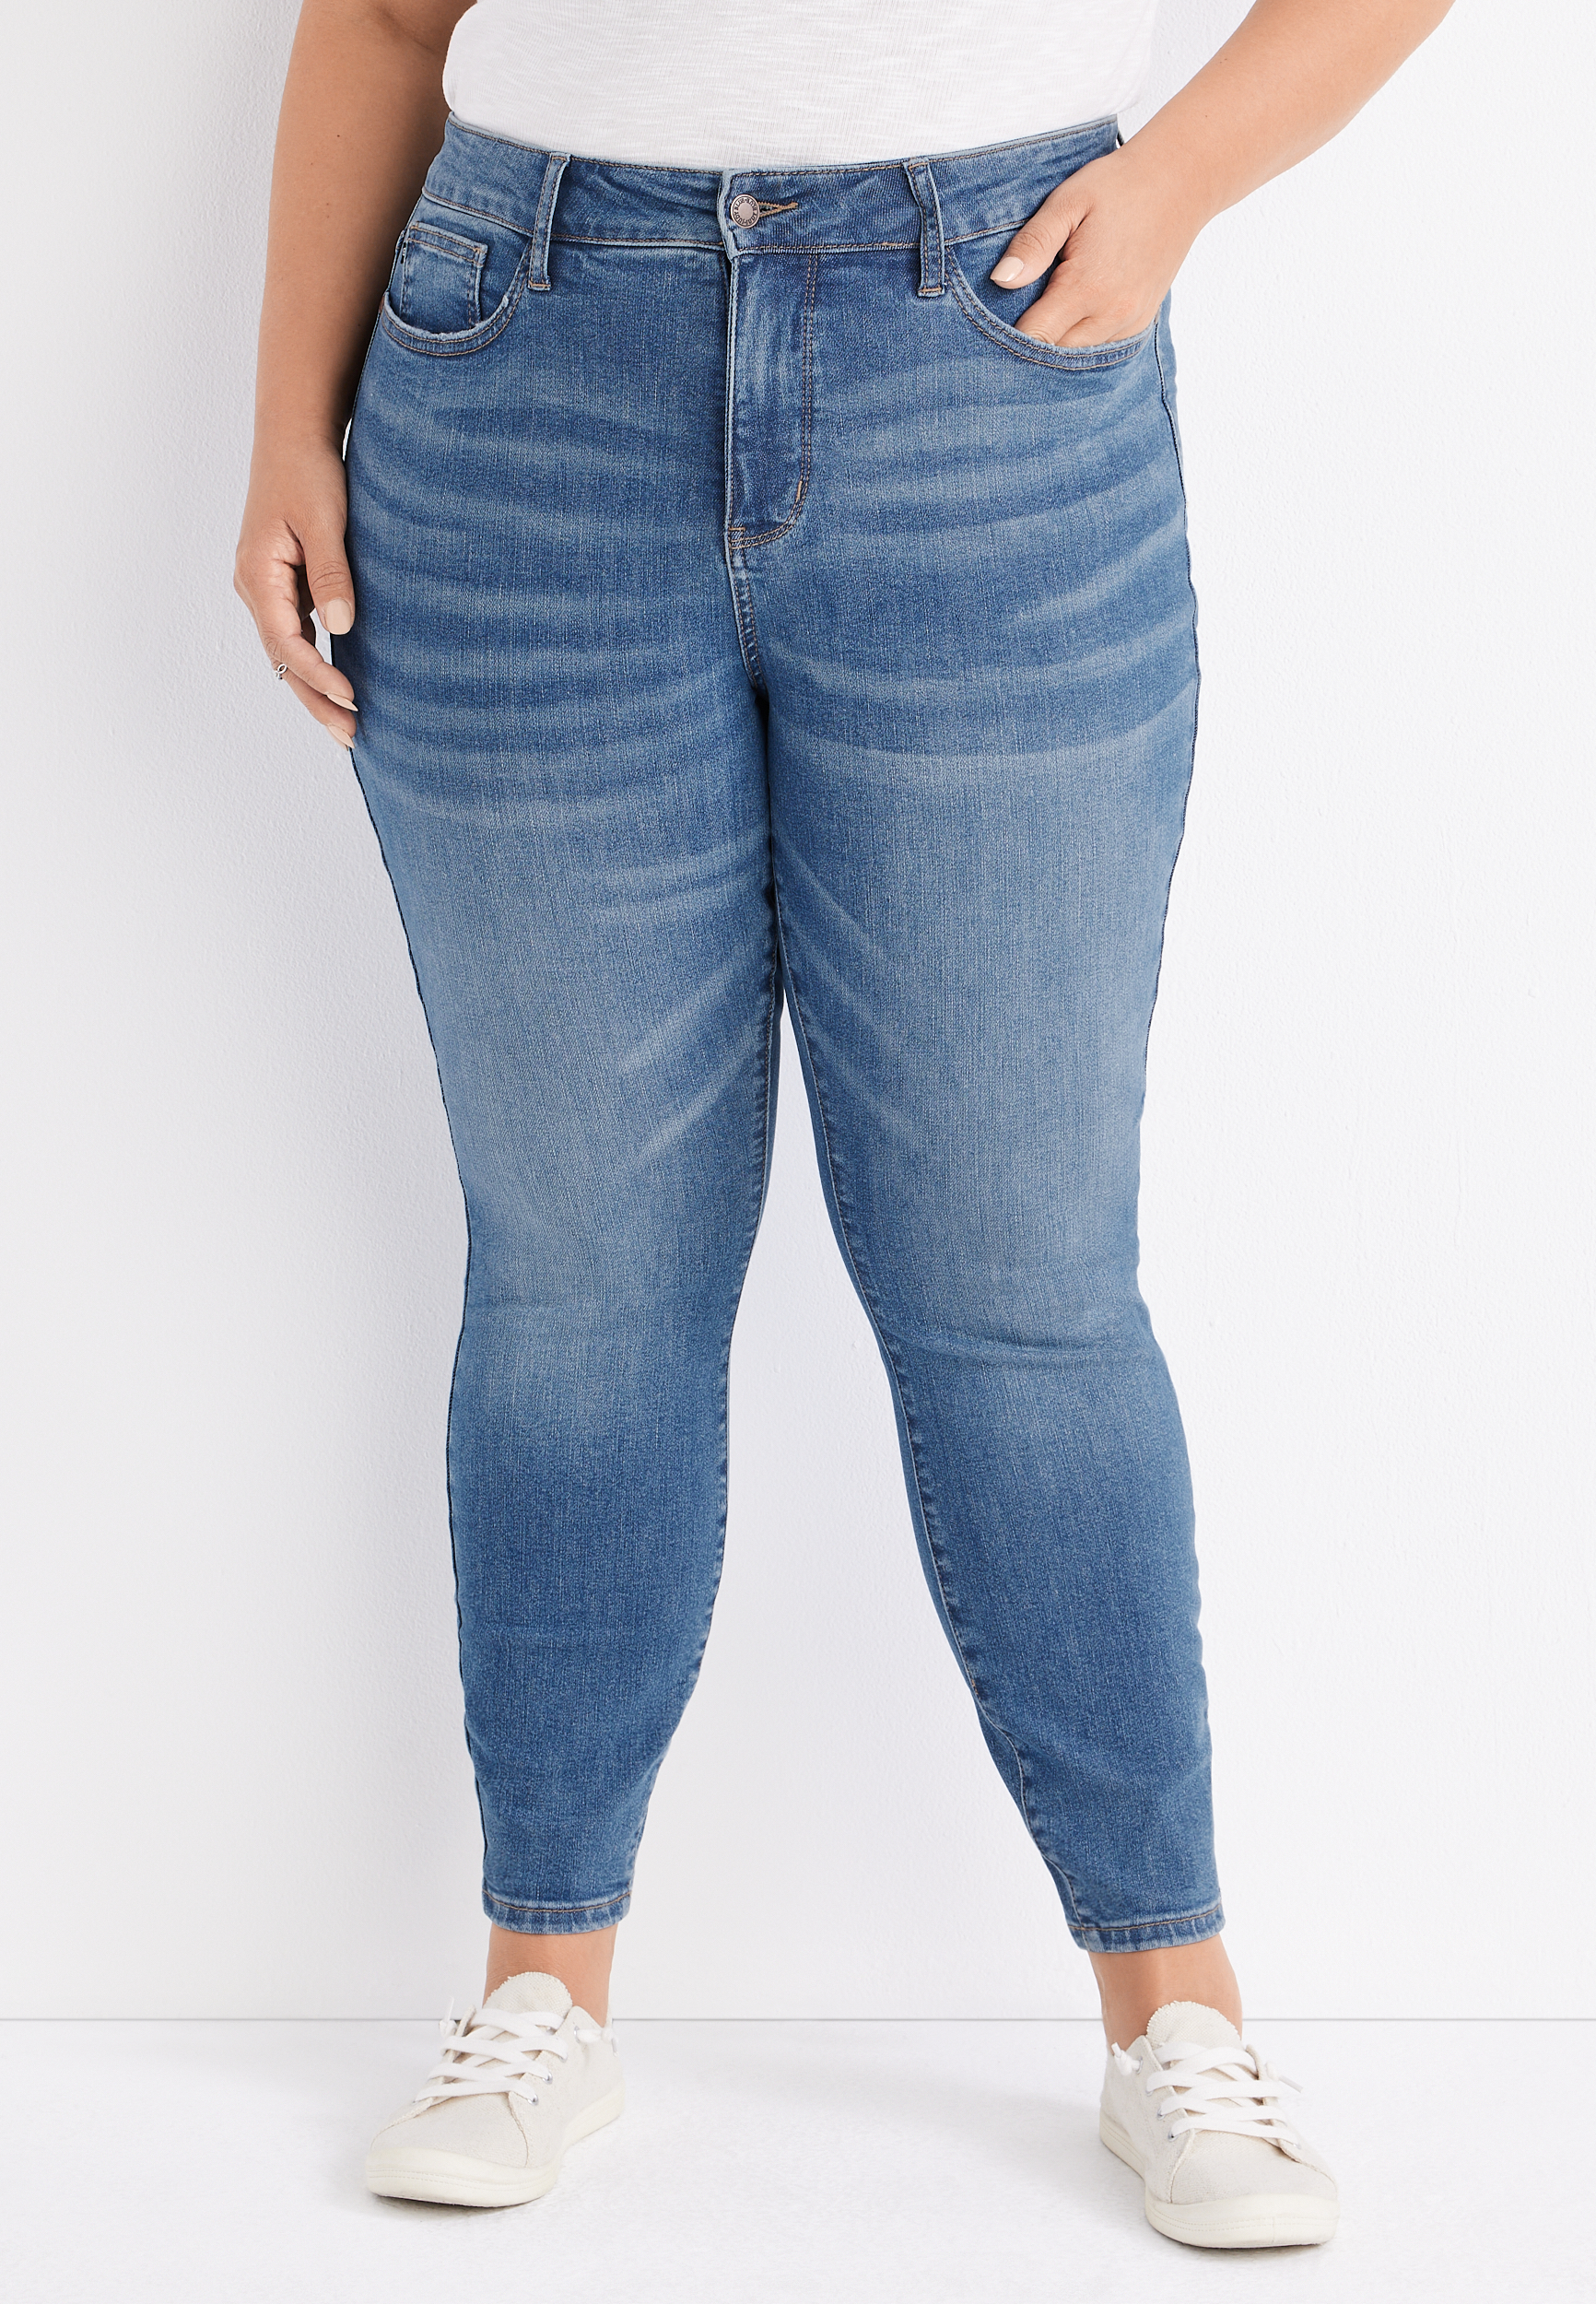 Plus Size Judy Blue® Jeans | maurices